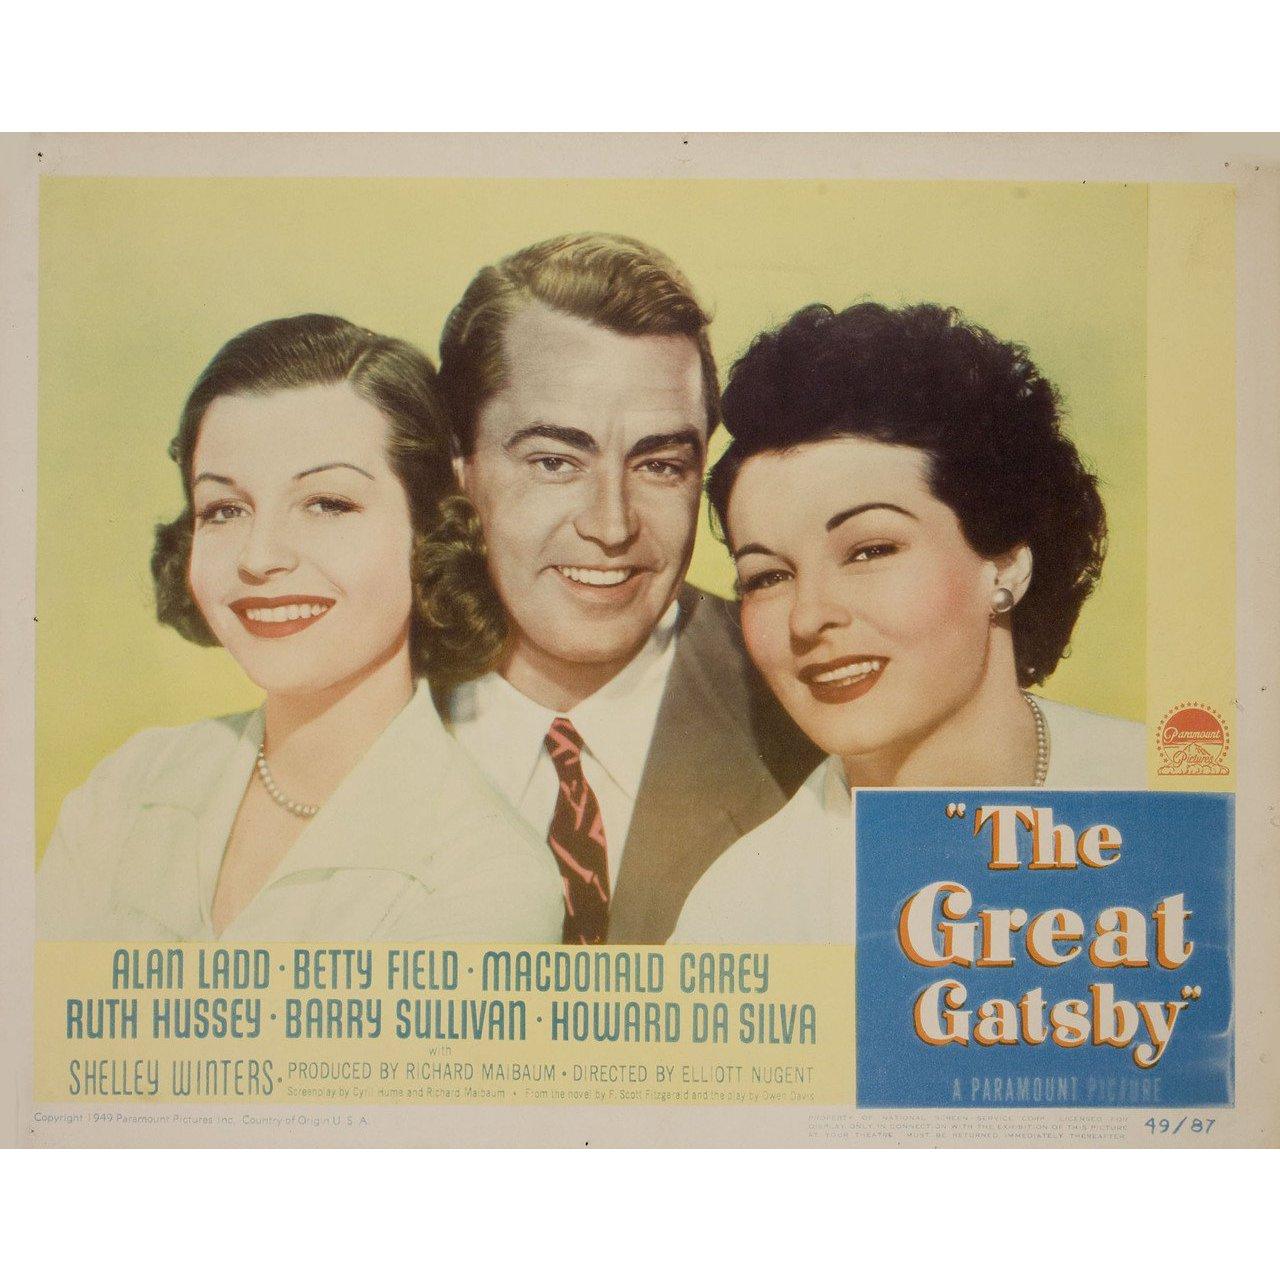 Original 1949 U.S. scene card for the film The Great Gatsby directed by Elliott Nugent with Alan Ladd / Betty Field / Macdonald Carey / Ruth Hussey. Very good-fine condition. Please note: the size is stated in inches and the actual size can vary by